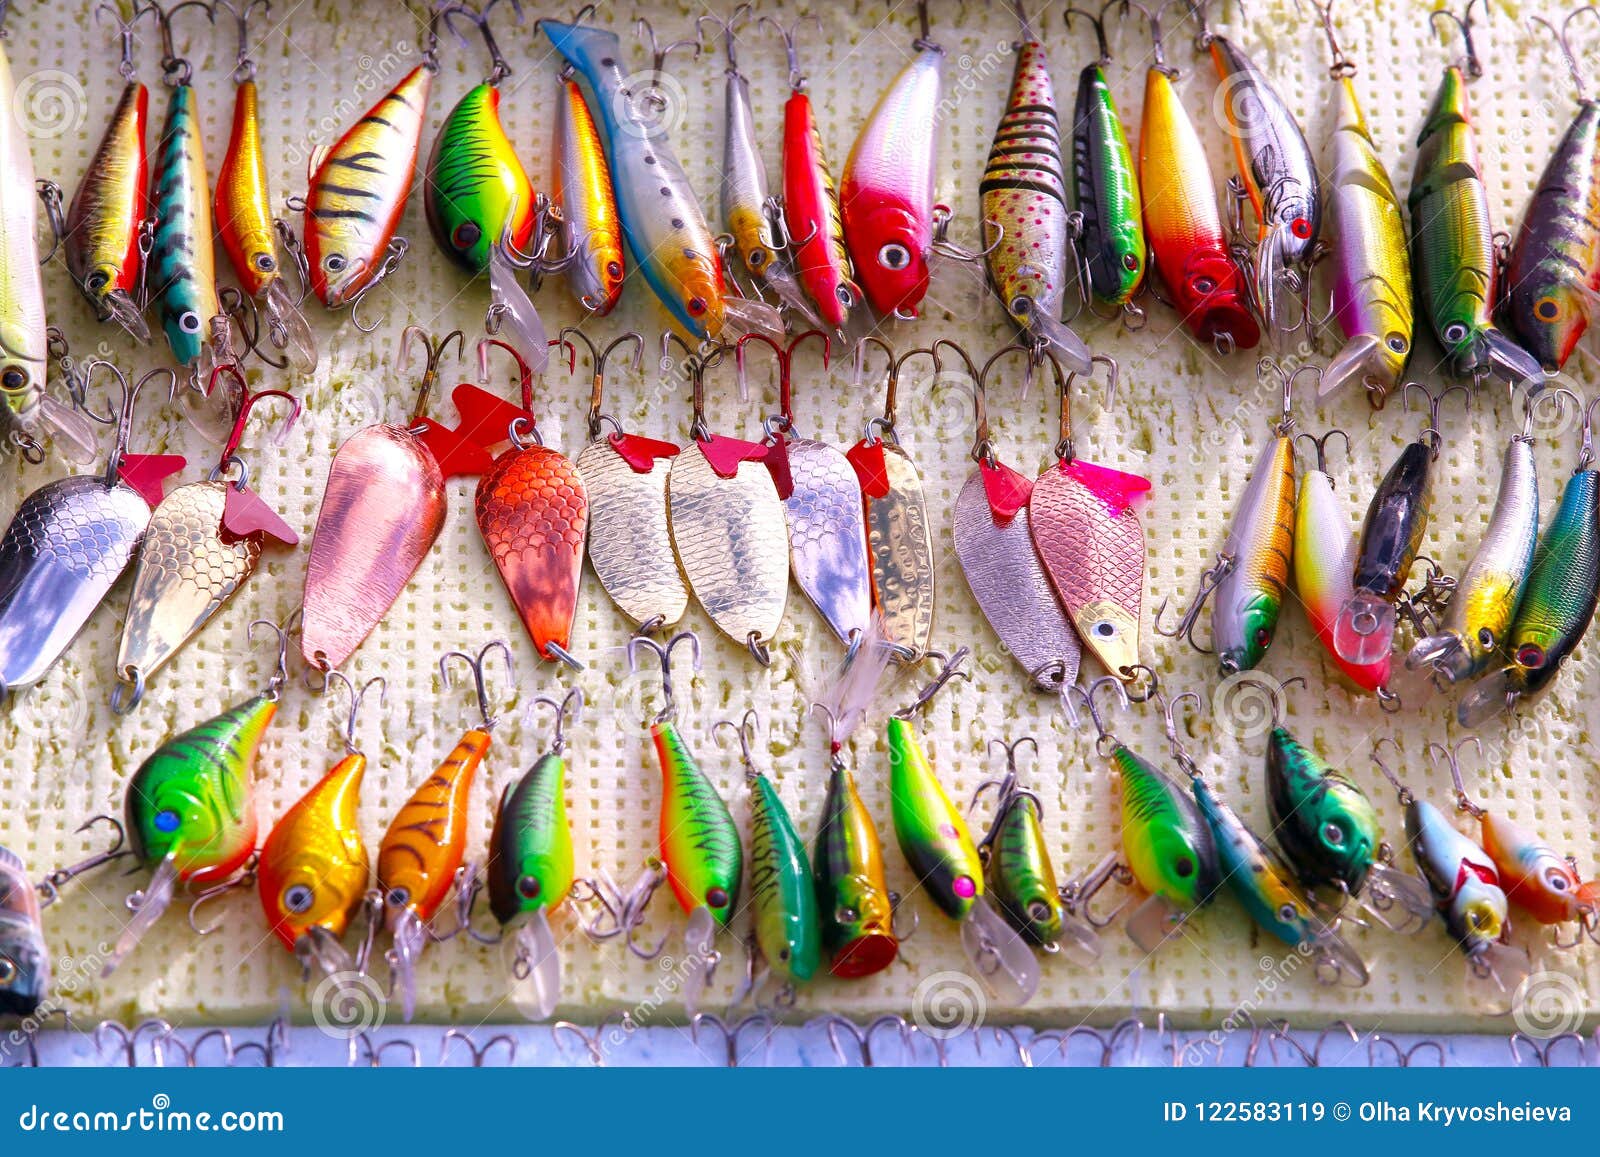 133 Plastic Spoon Float Stock Photos - Free & Royalty-Free Stock Photos  from Dreamstime